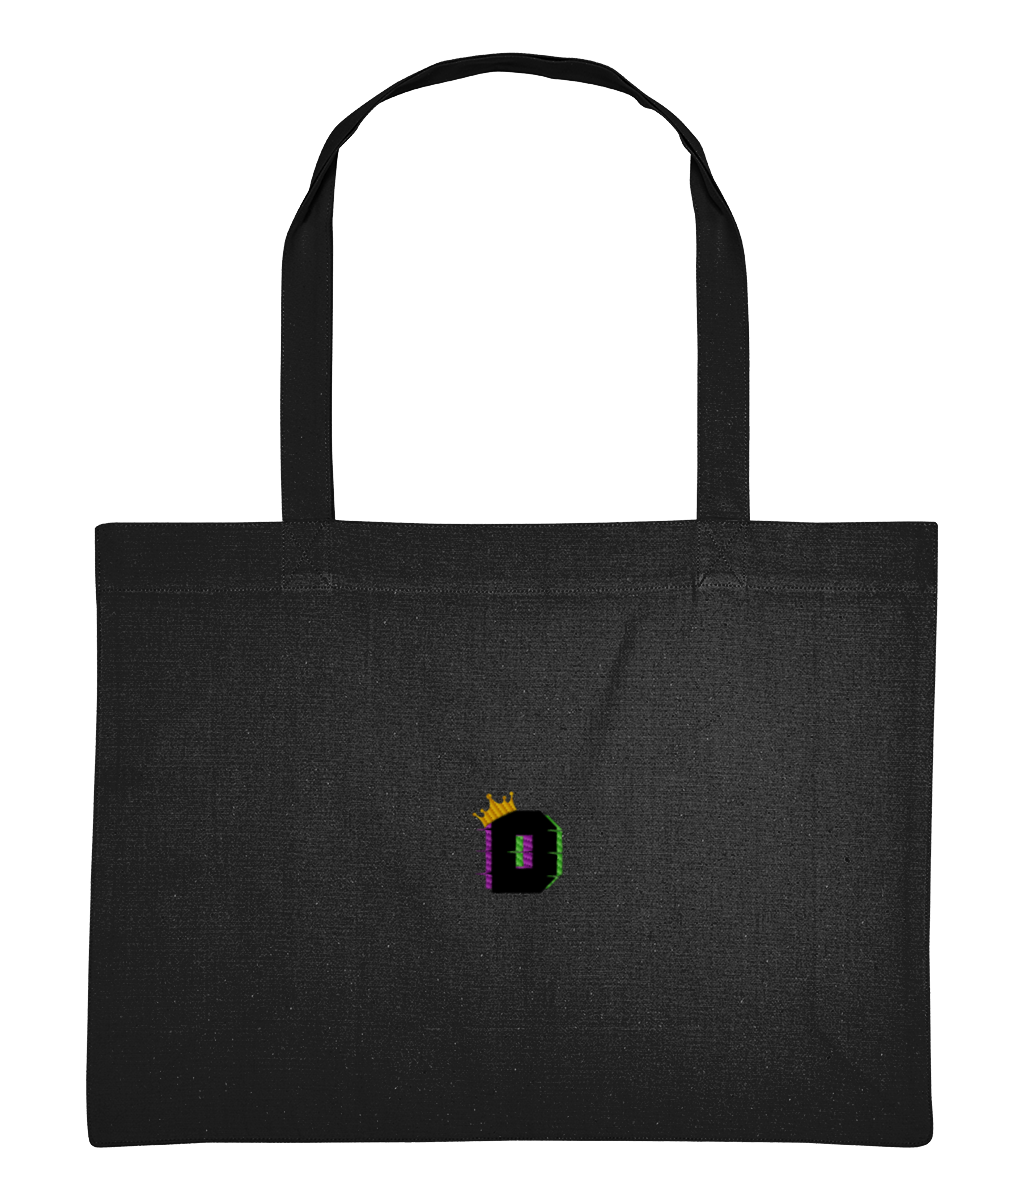 The King D42 Embroidered Shopping Bag